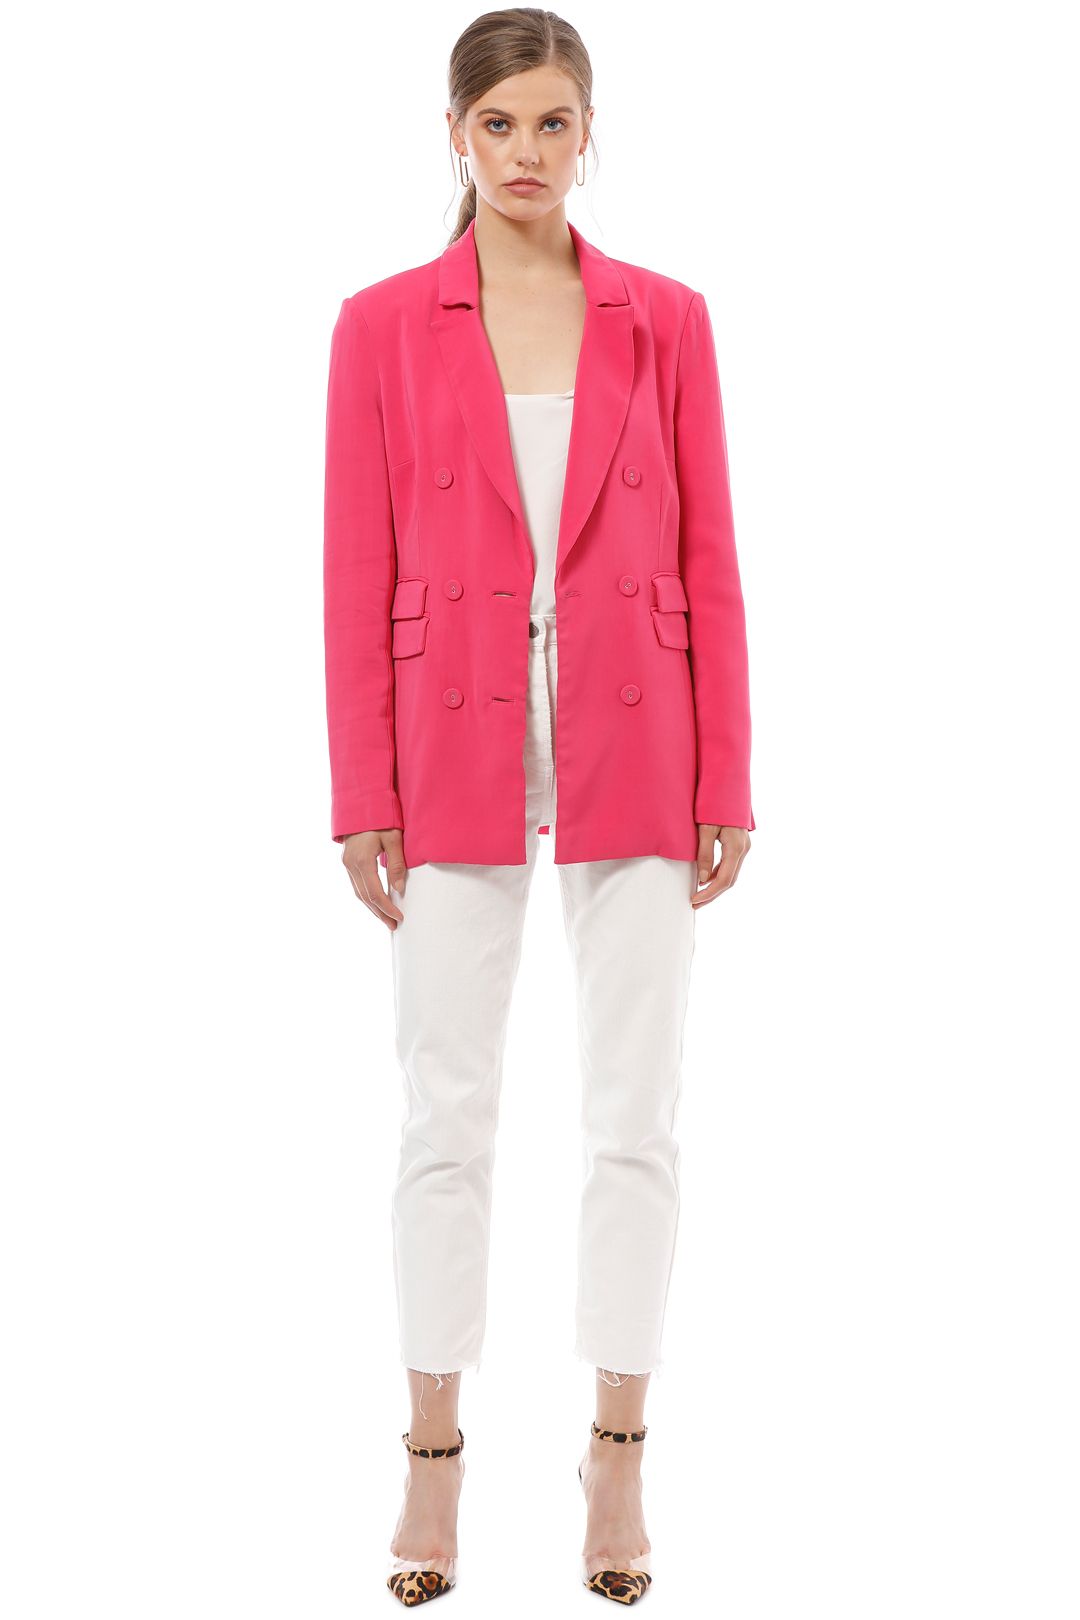 CMEO Collective - Own Light Blazer - Pink - Front